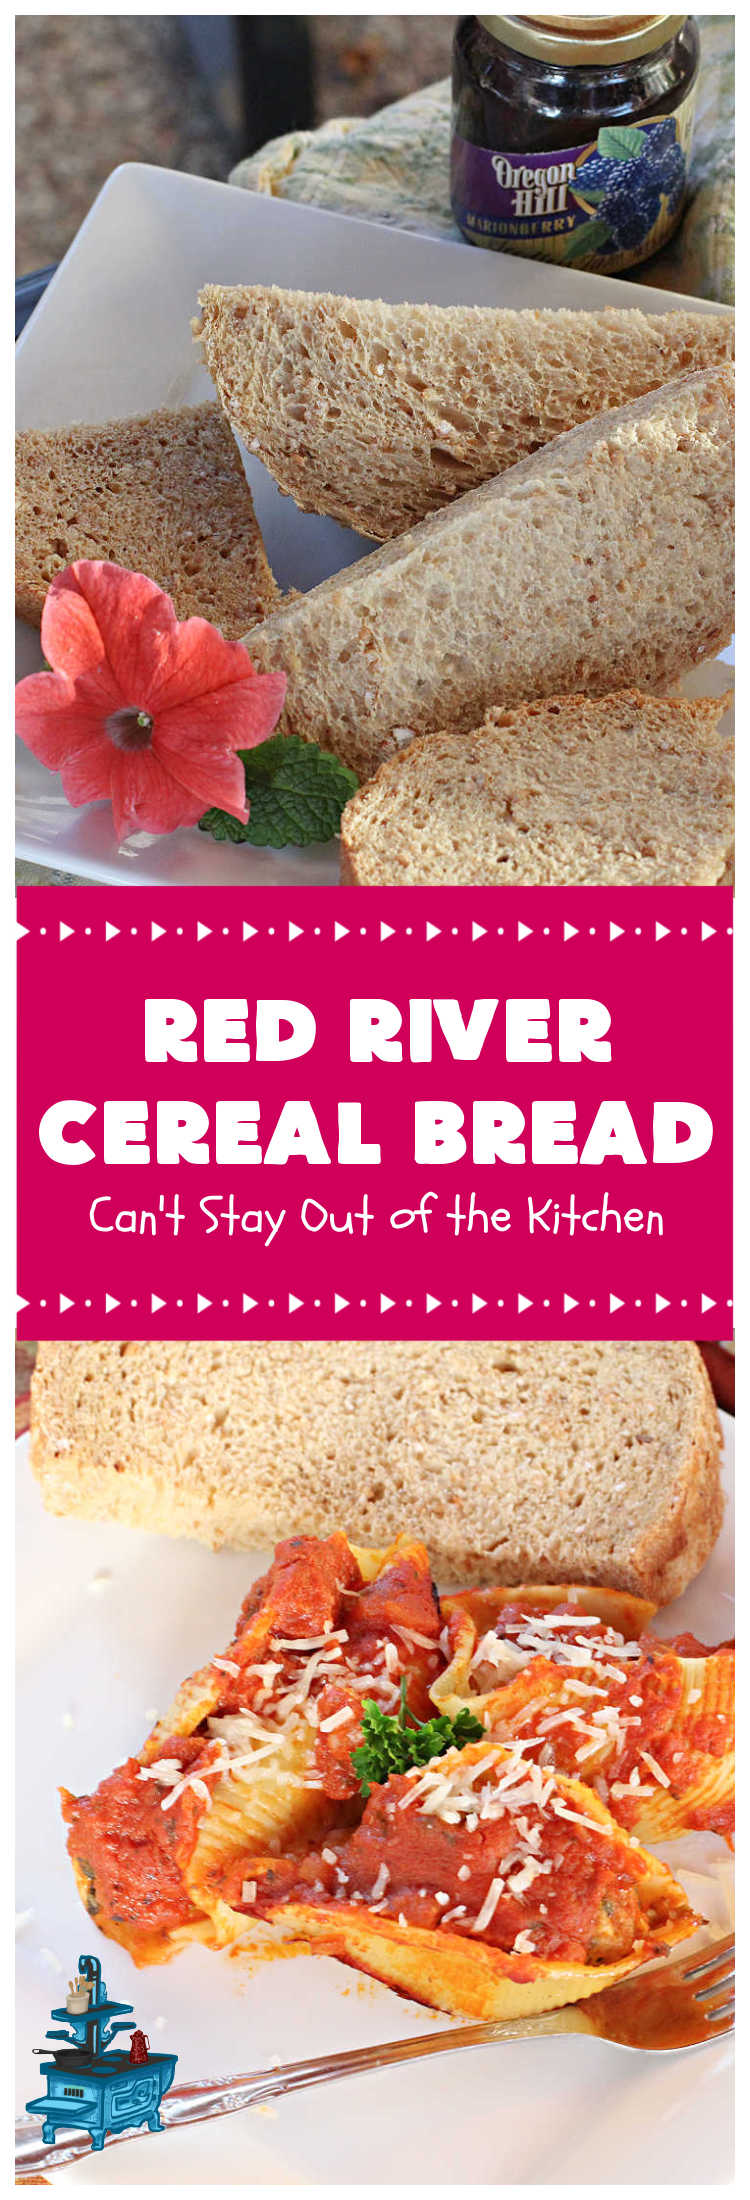 Red River Cereal Bread | Can't Stay Out of the Kitchen | This delicious homemade #bread is so easy since it's made in the #breadmaker! It uses #RedRiverCereal & #WholeWheatFlour along with #honey for a homey delicious taste that's incredibly good. If #HomemadeBread is your comfort food of choice, this one is fantastic. #BreadmakerBread #RedRiverCerealBread